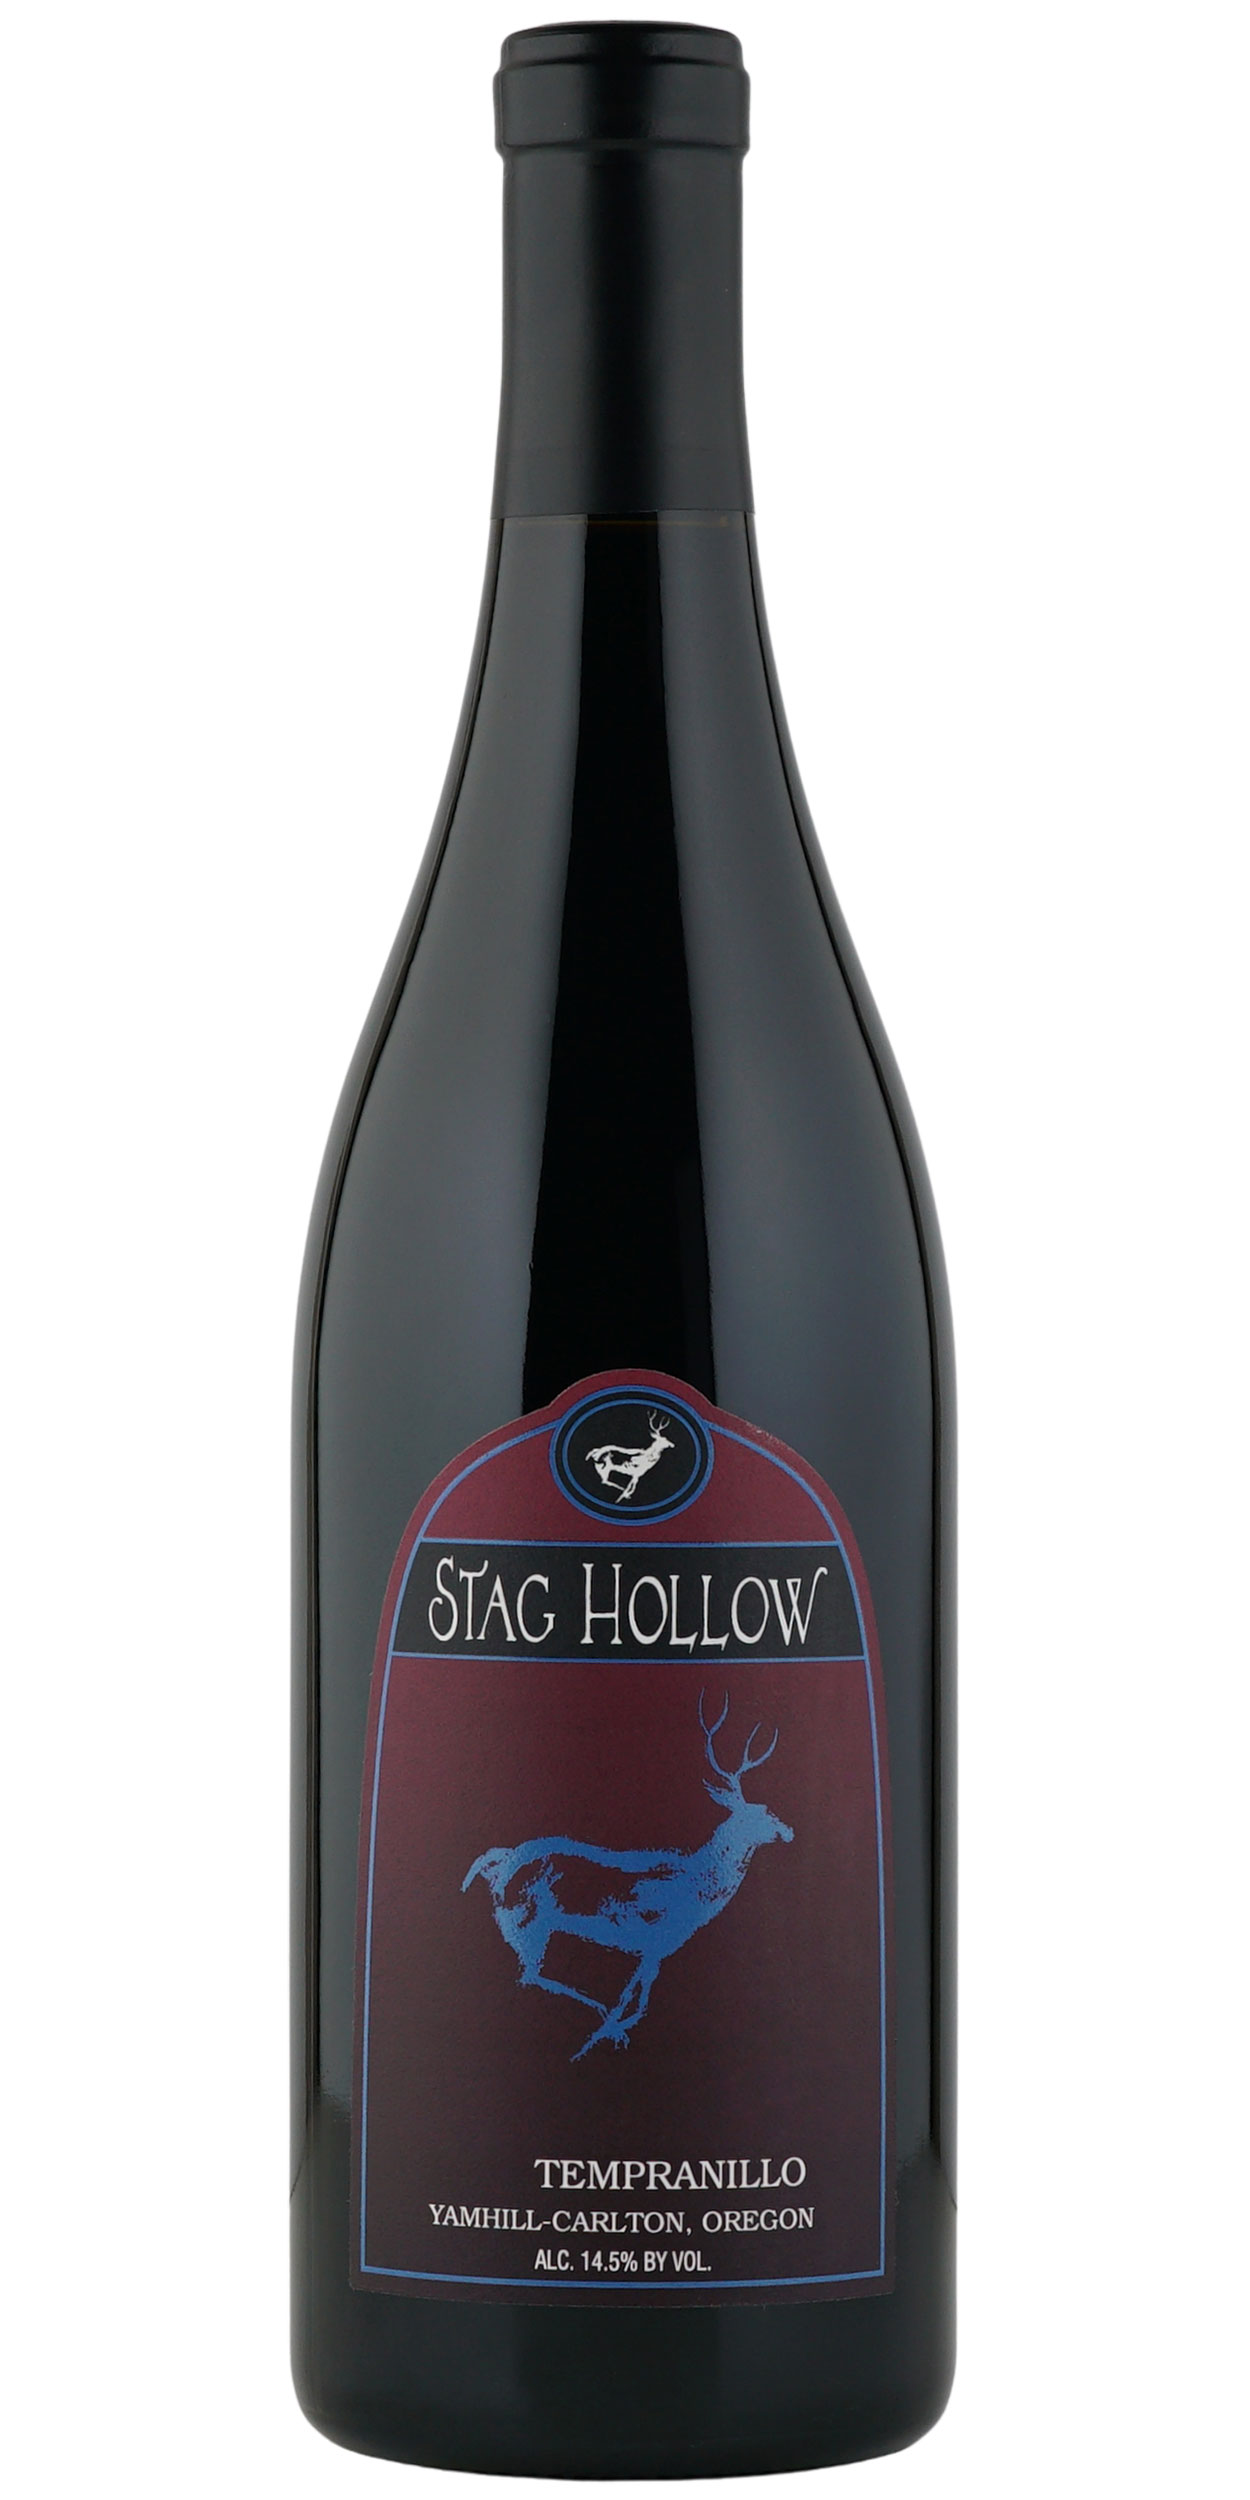 Bottle of Stag Hollow Tempranillo